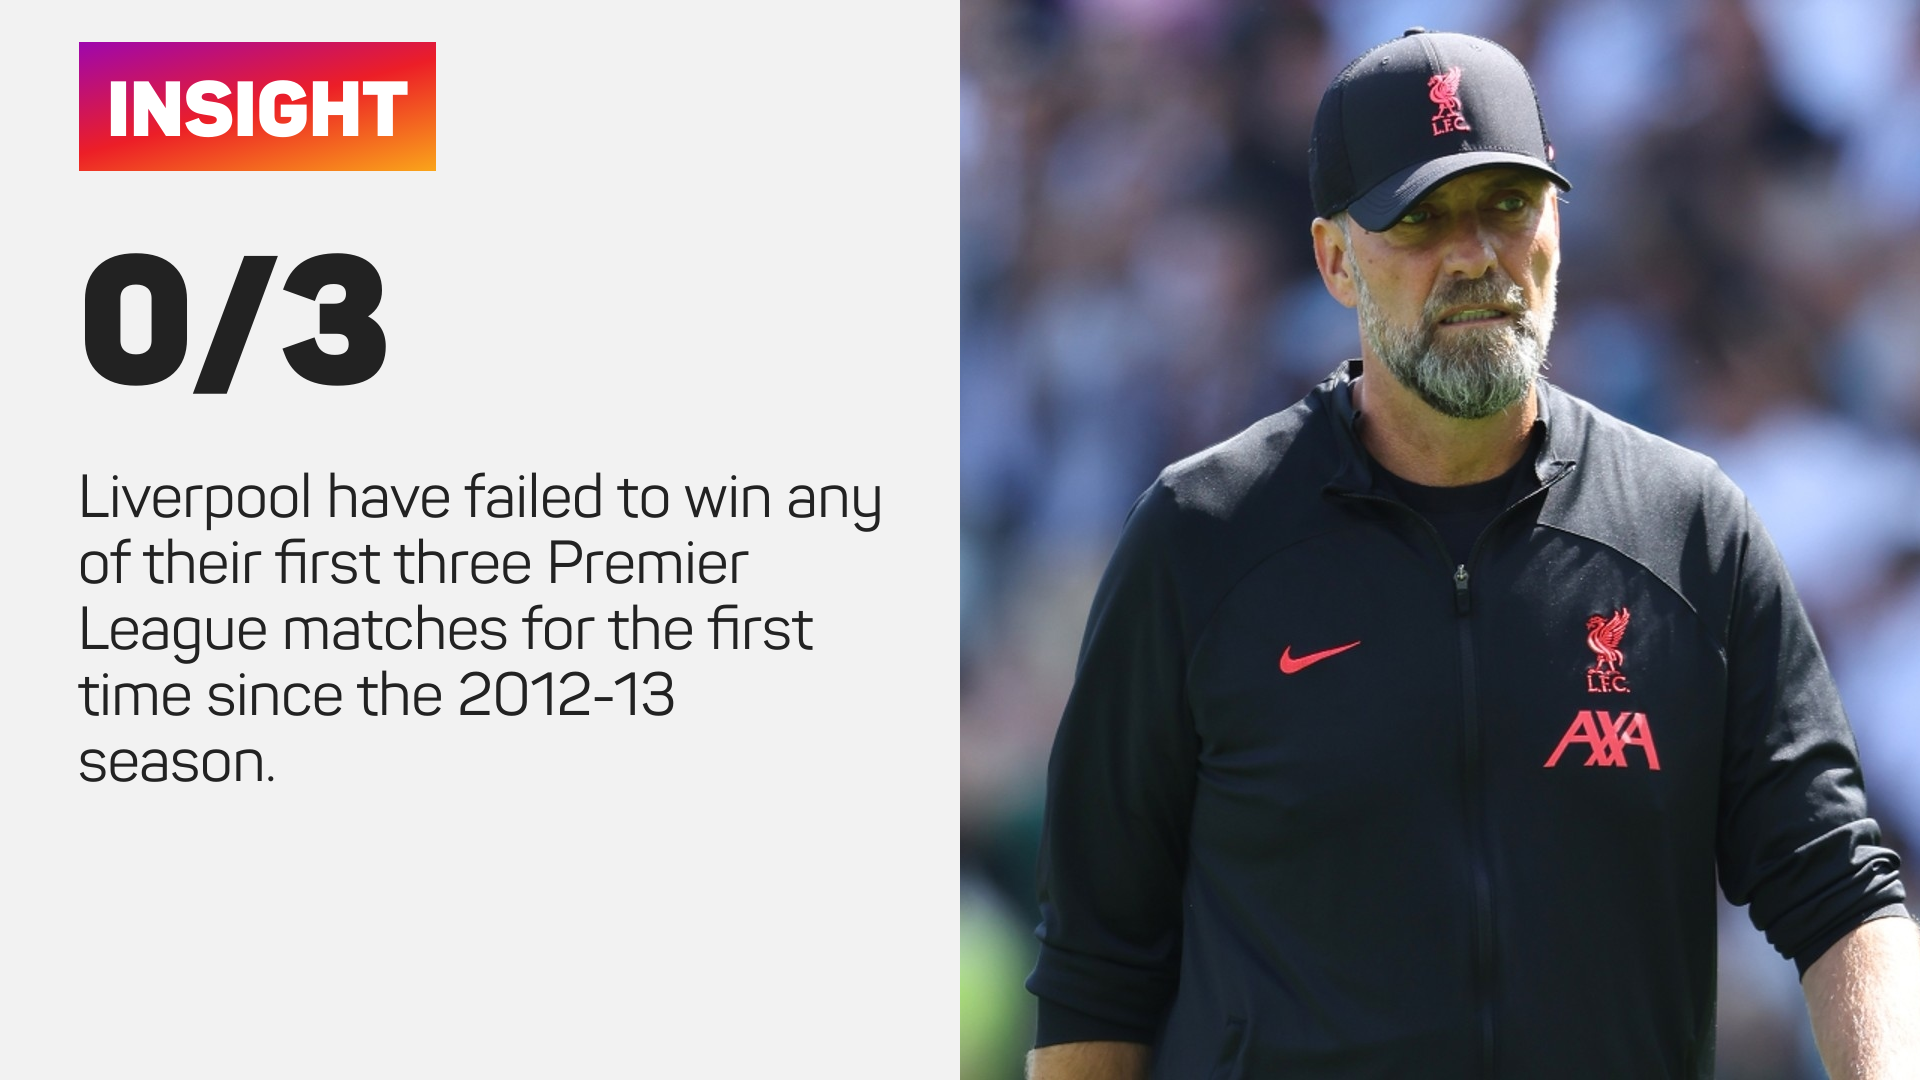 Liverpool are winless in their first three Premier League games